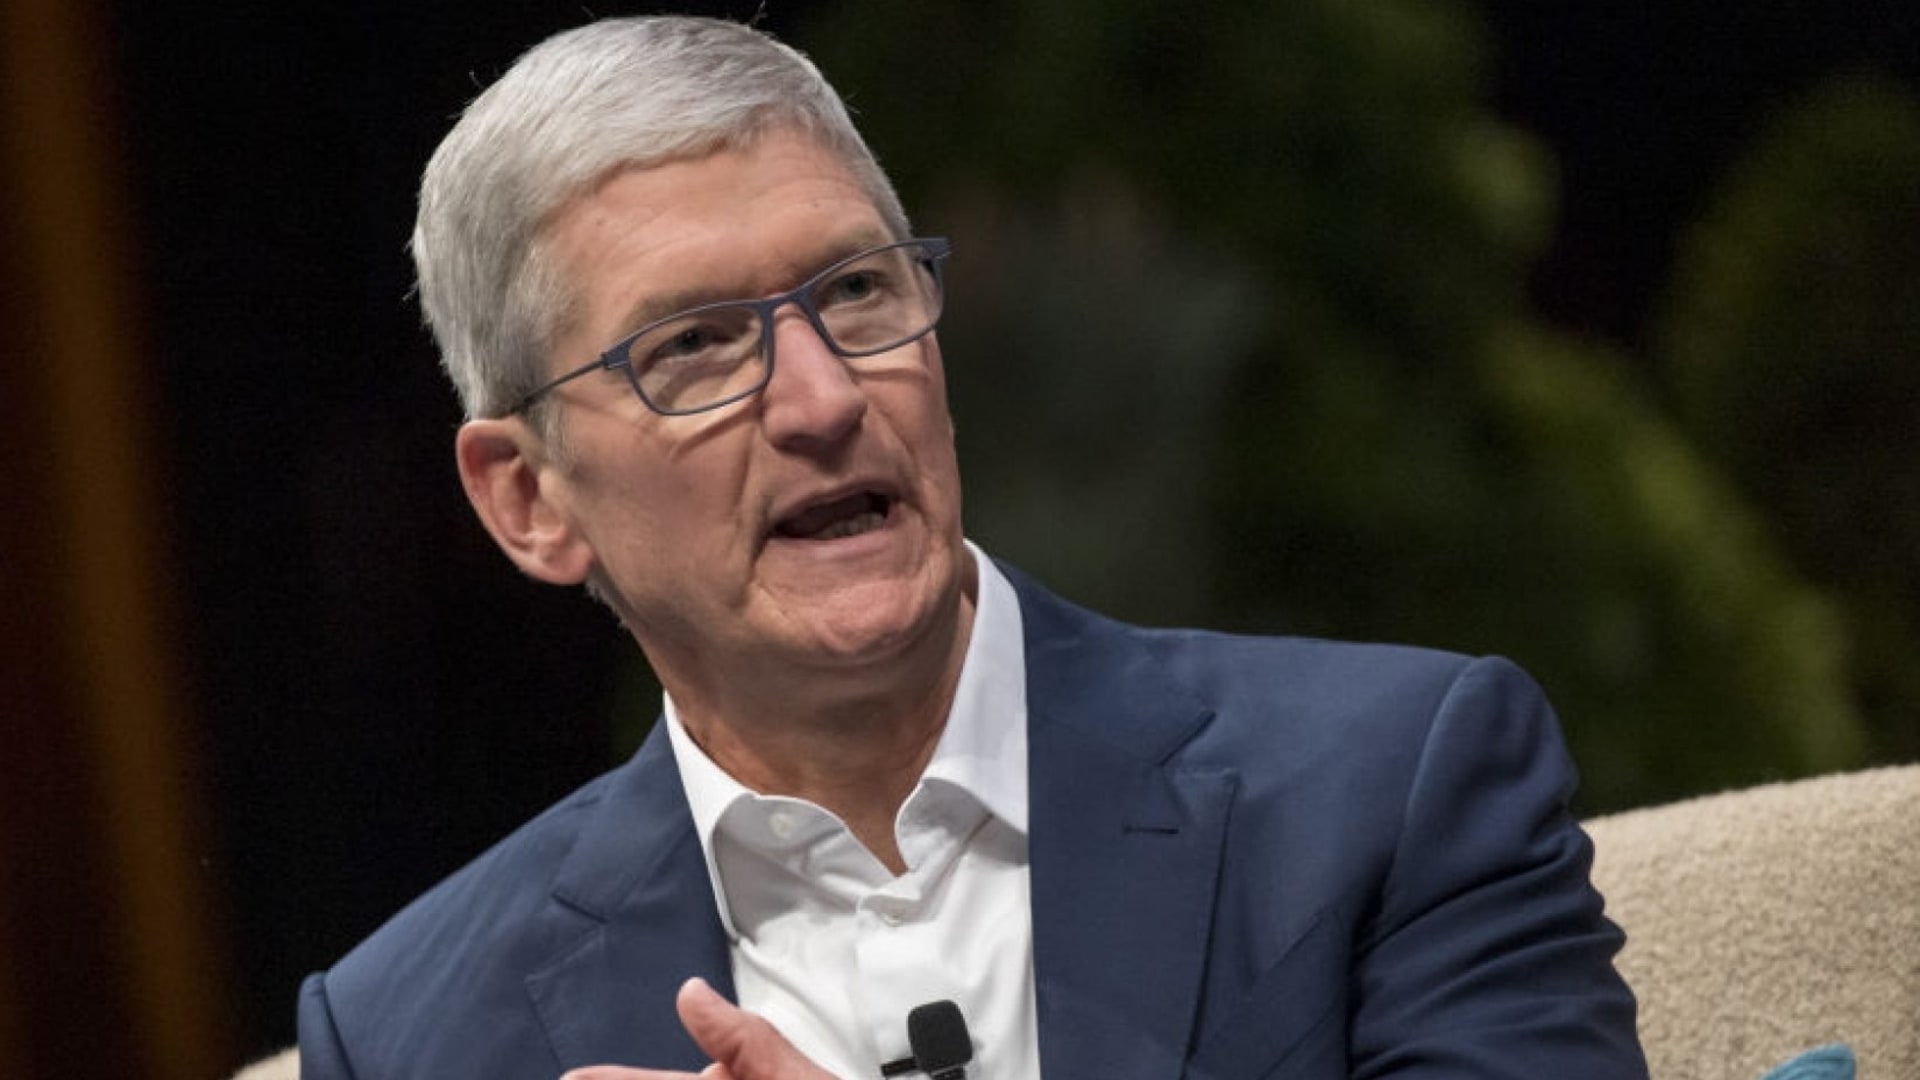 Tim Cook Just Explained a Brutal Truth About Failure That Most People Never Acknowledge